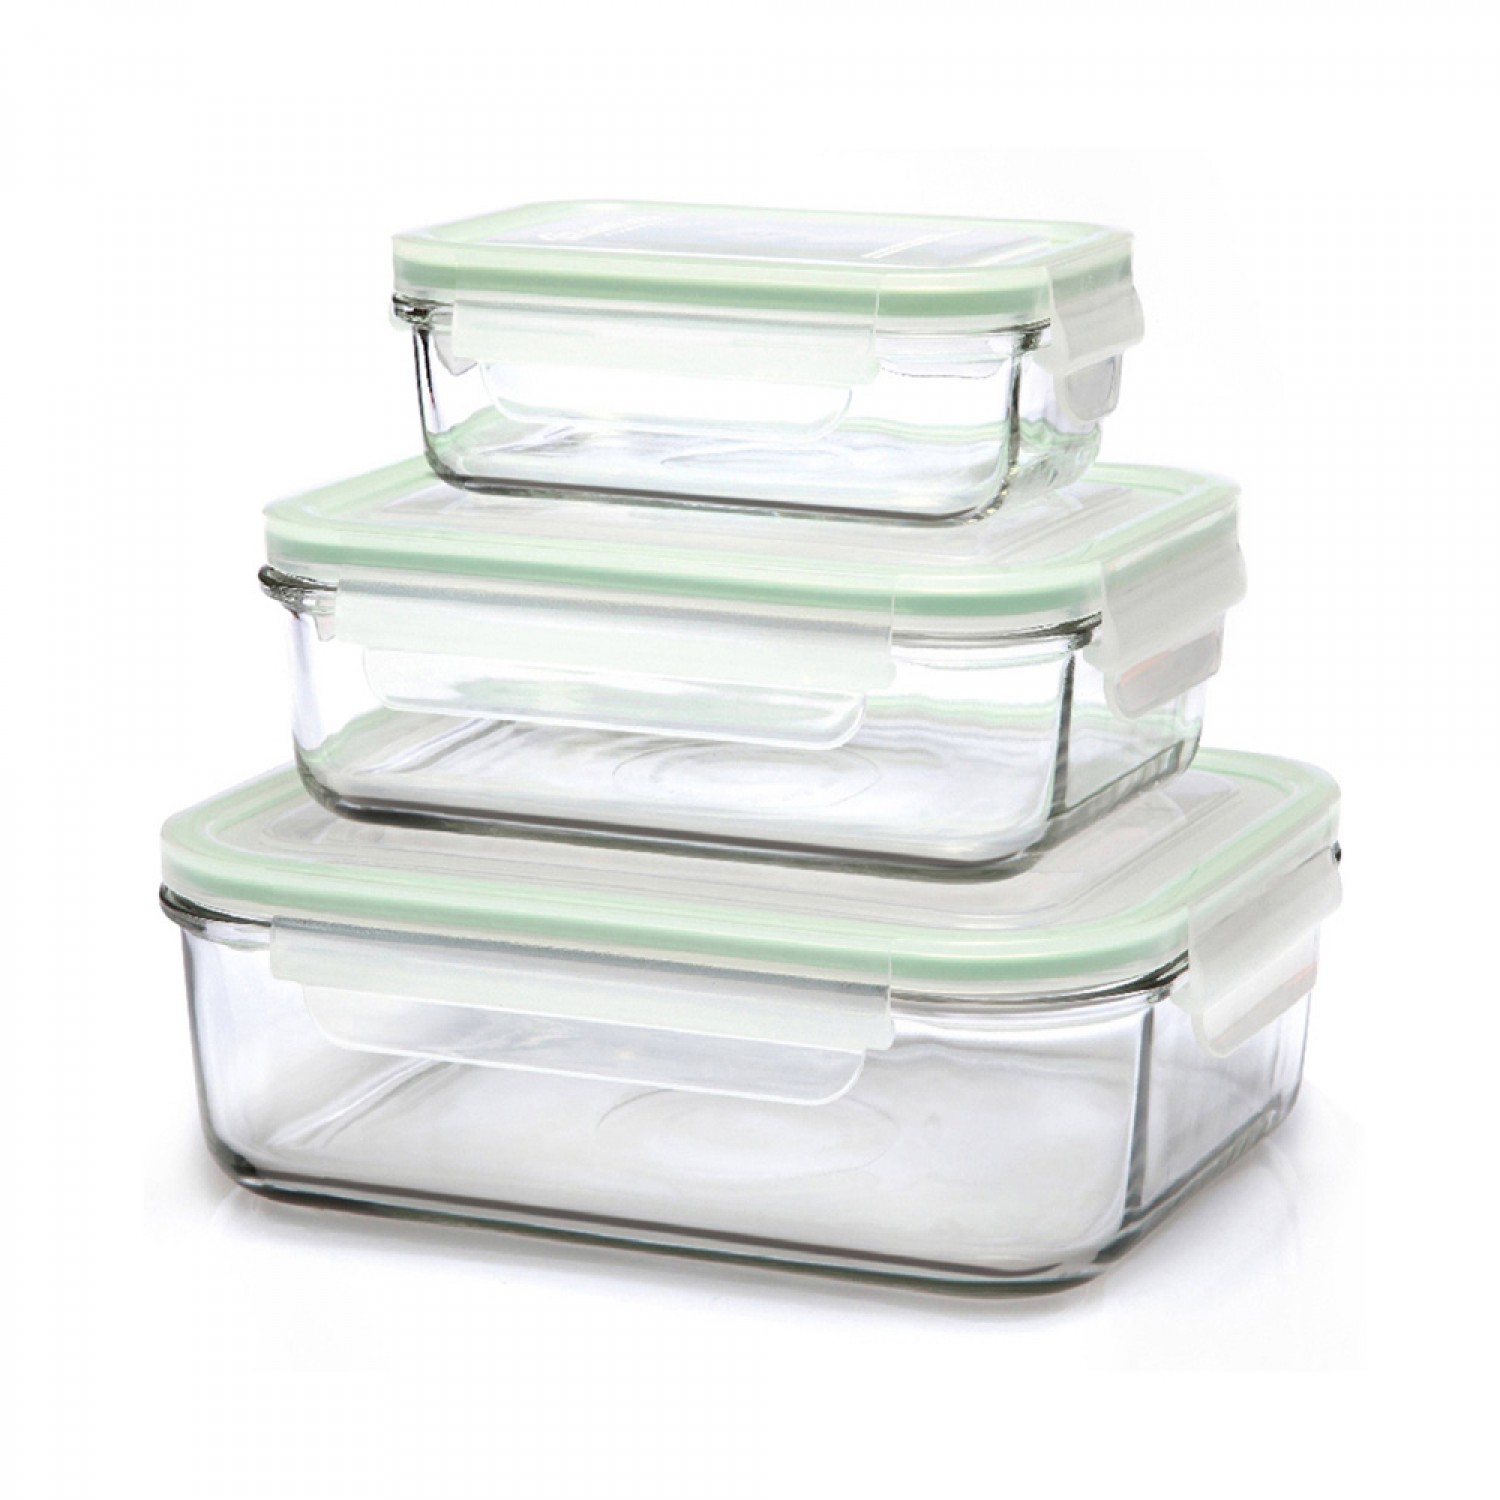 Classic Food Containers rectangular